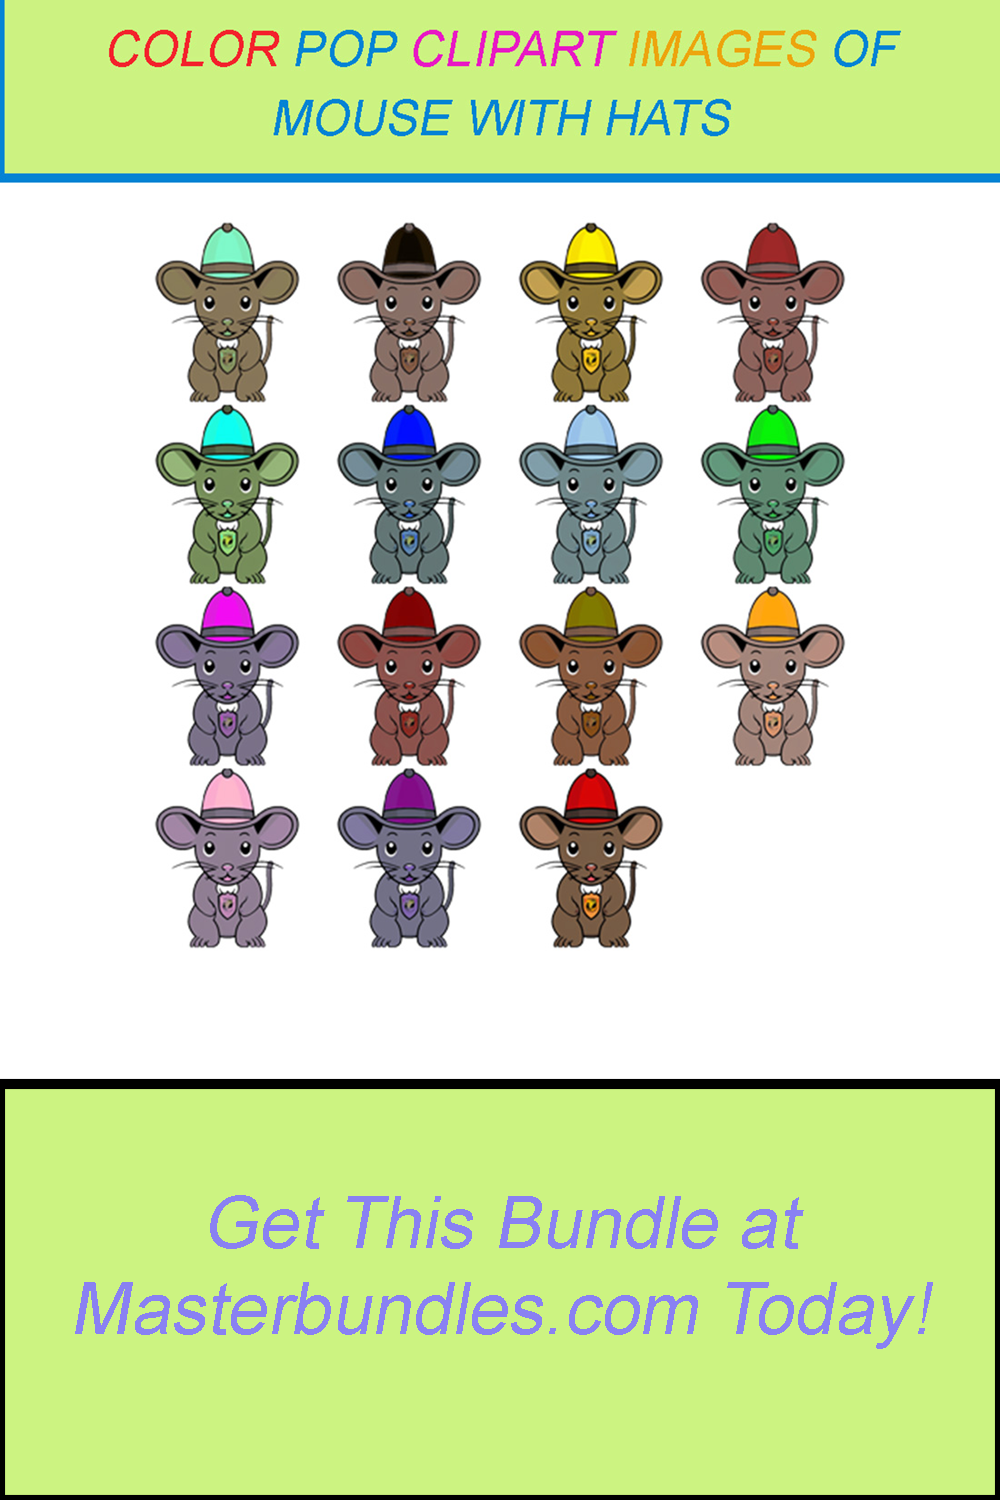 15 COLOR POP CLIPART IMAGES OF MOUSE WITH HATS pinterest preview image.